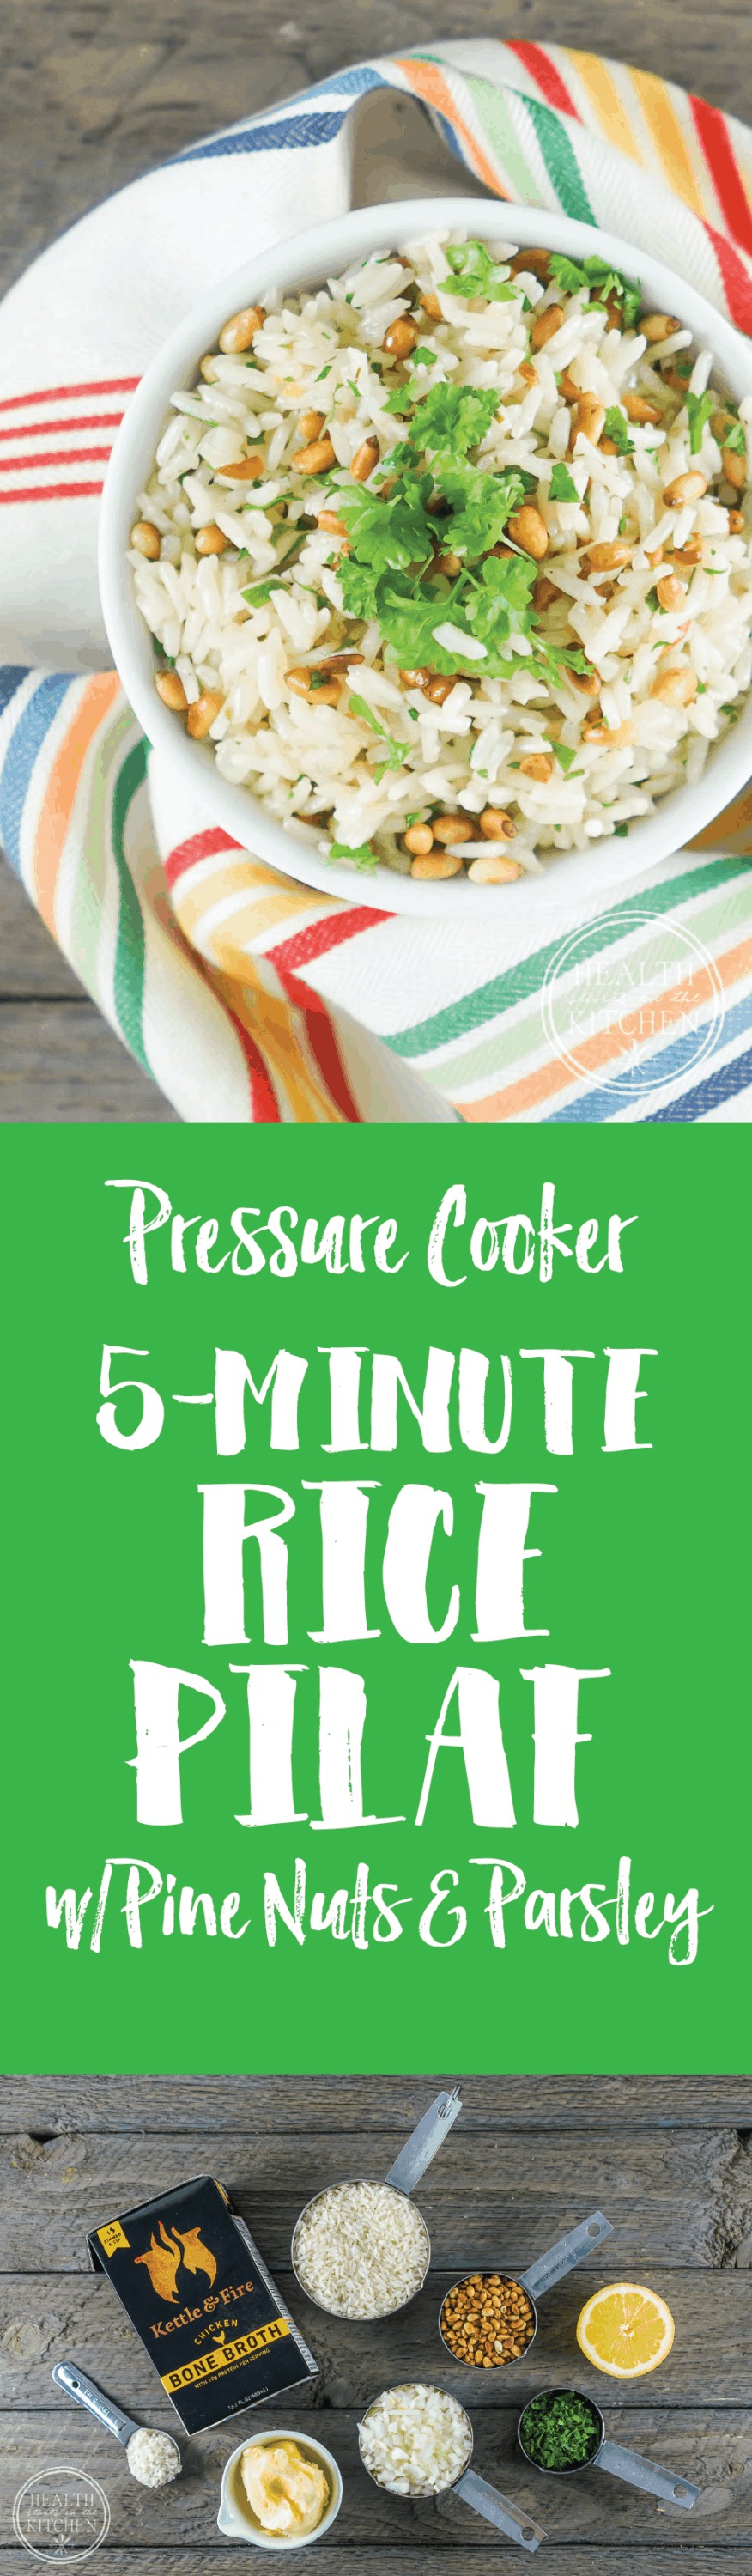 5 Minute Pressure Cooker Rice Pilaf with Pine Nuts and Parsley